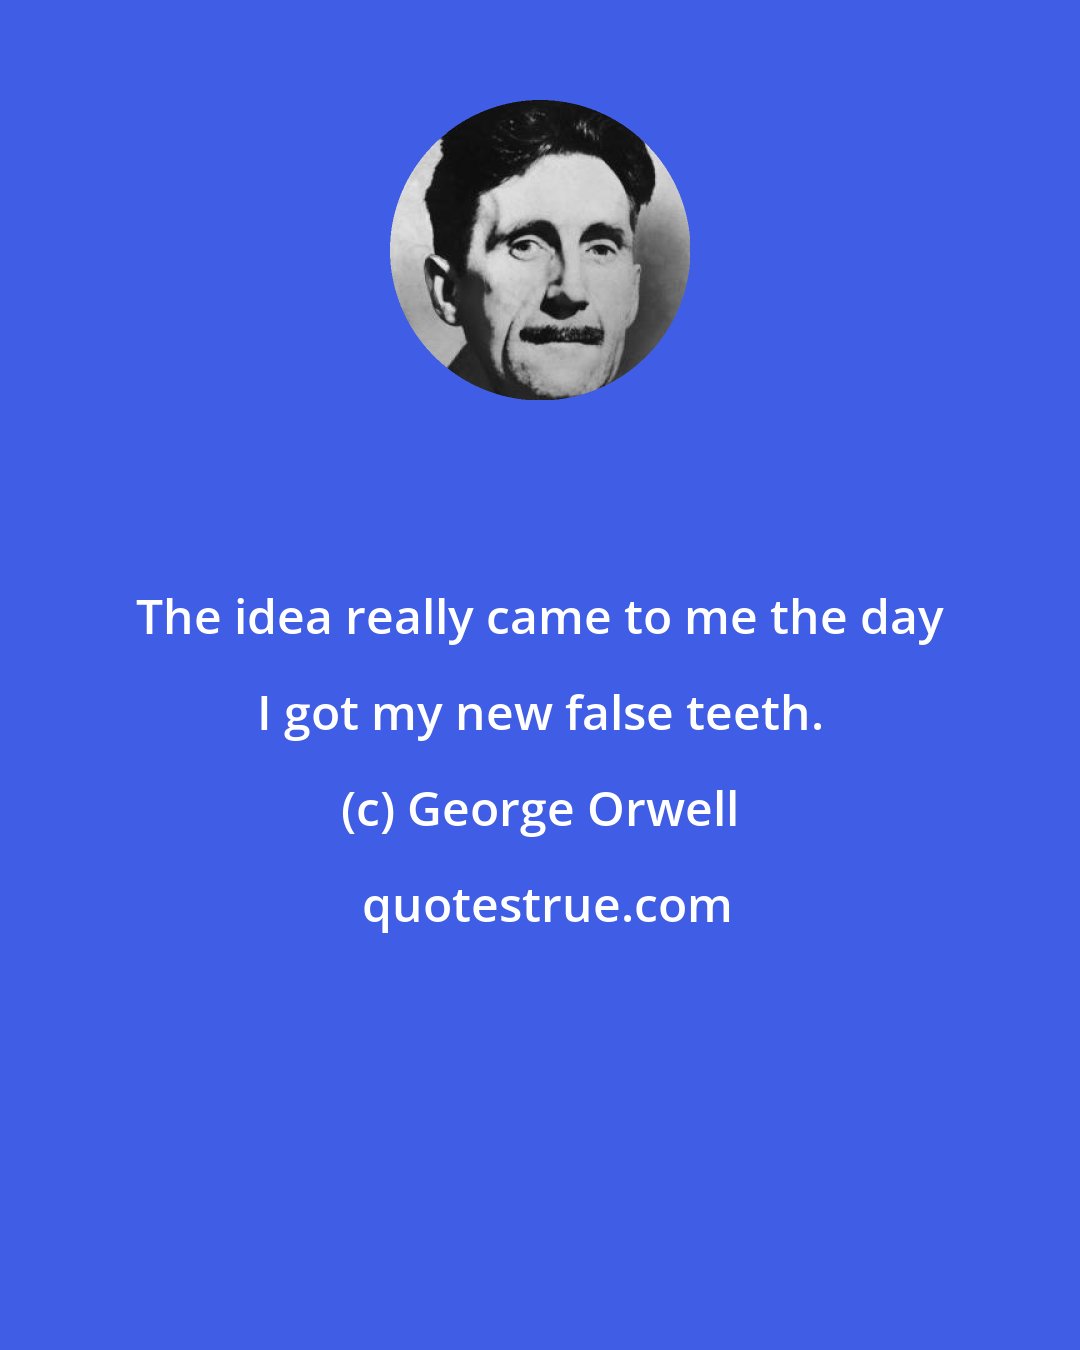 George Orwell: The idea really came to me the day I got my new false teeth.